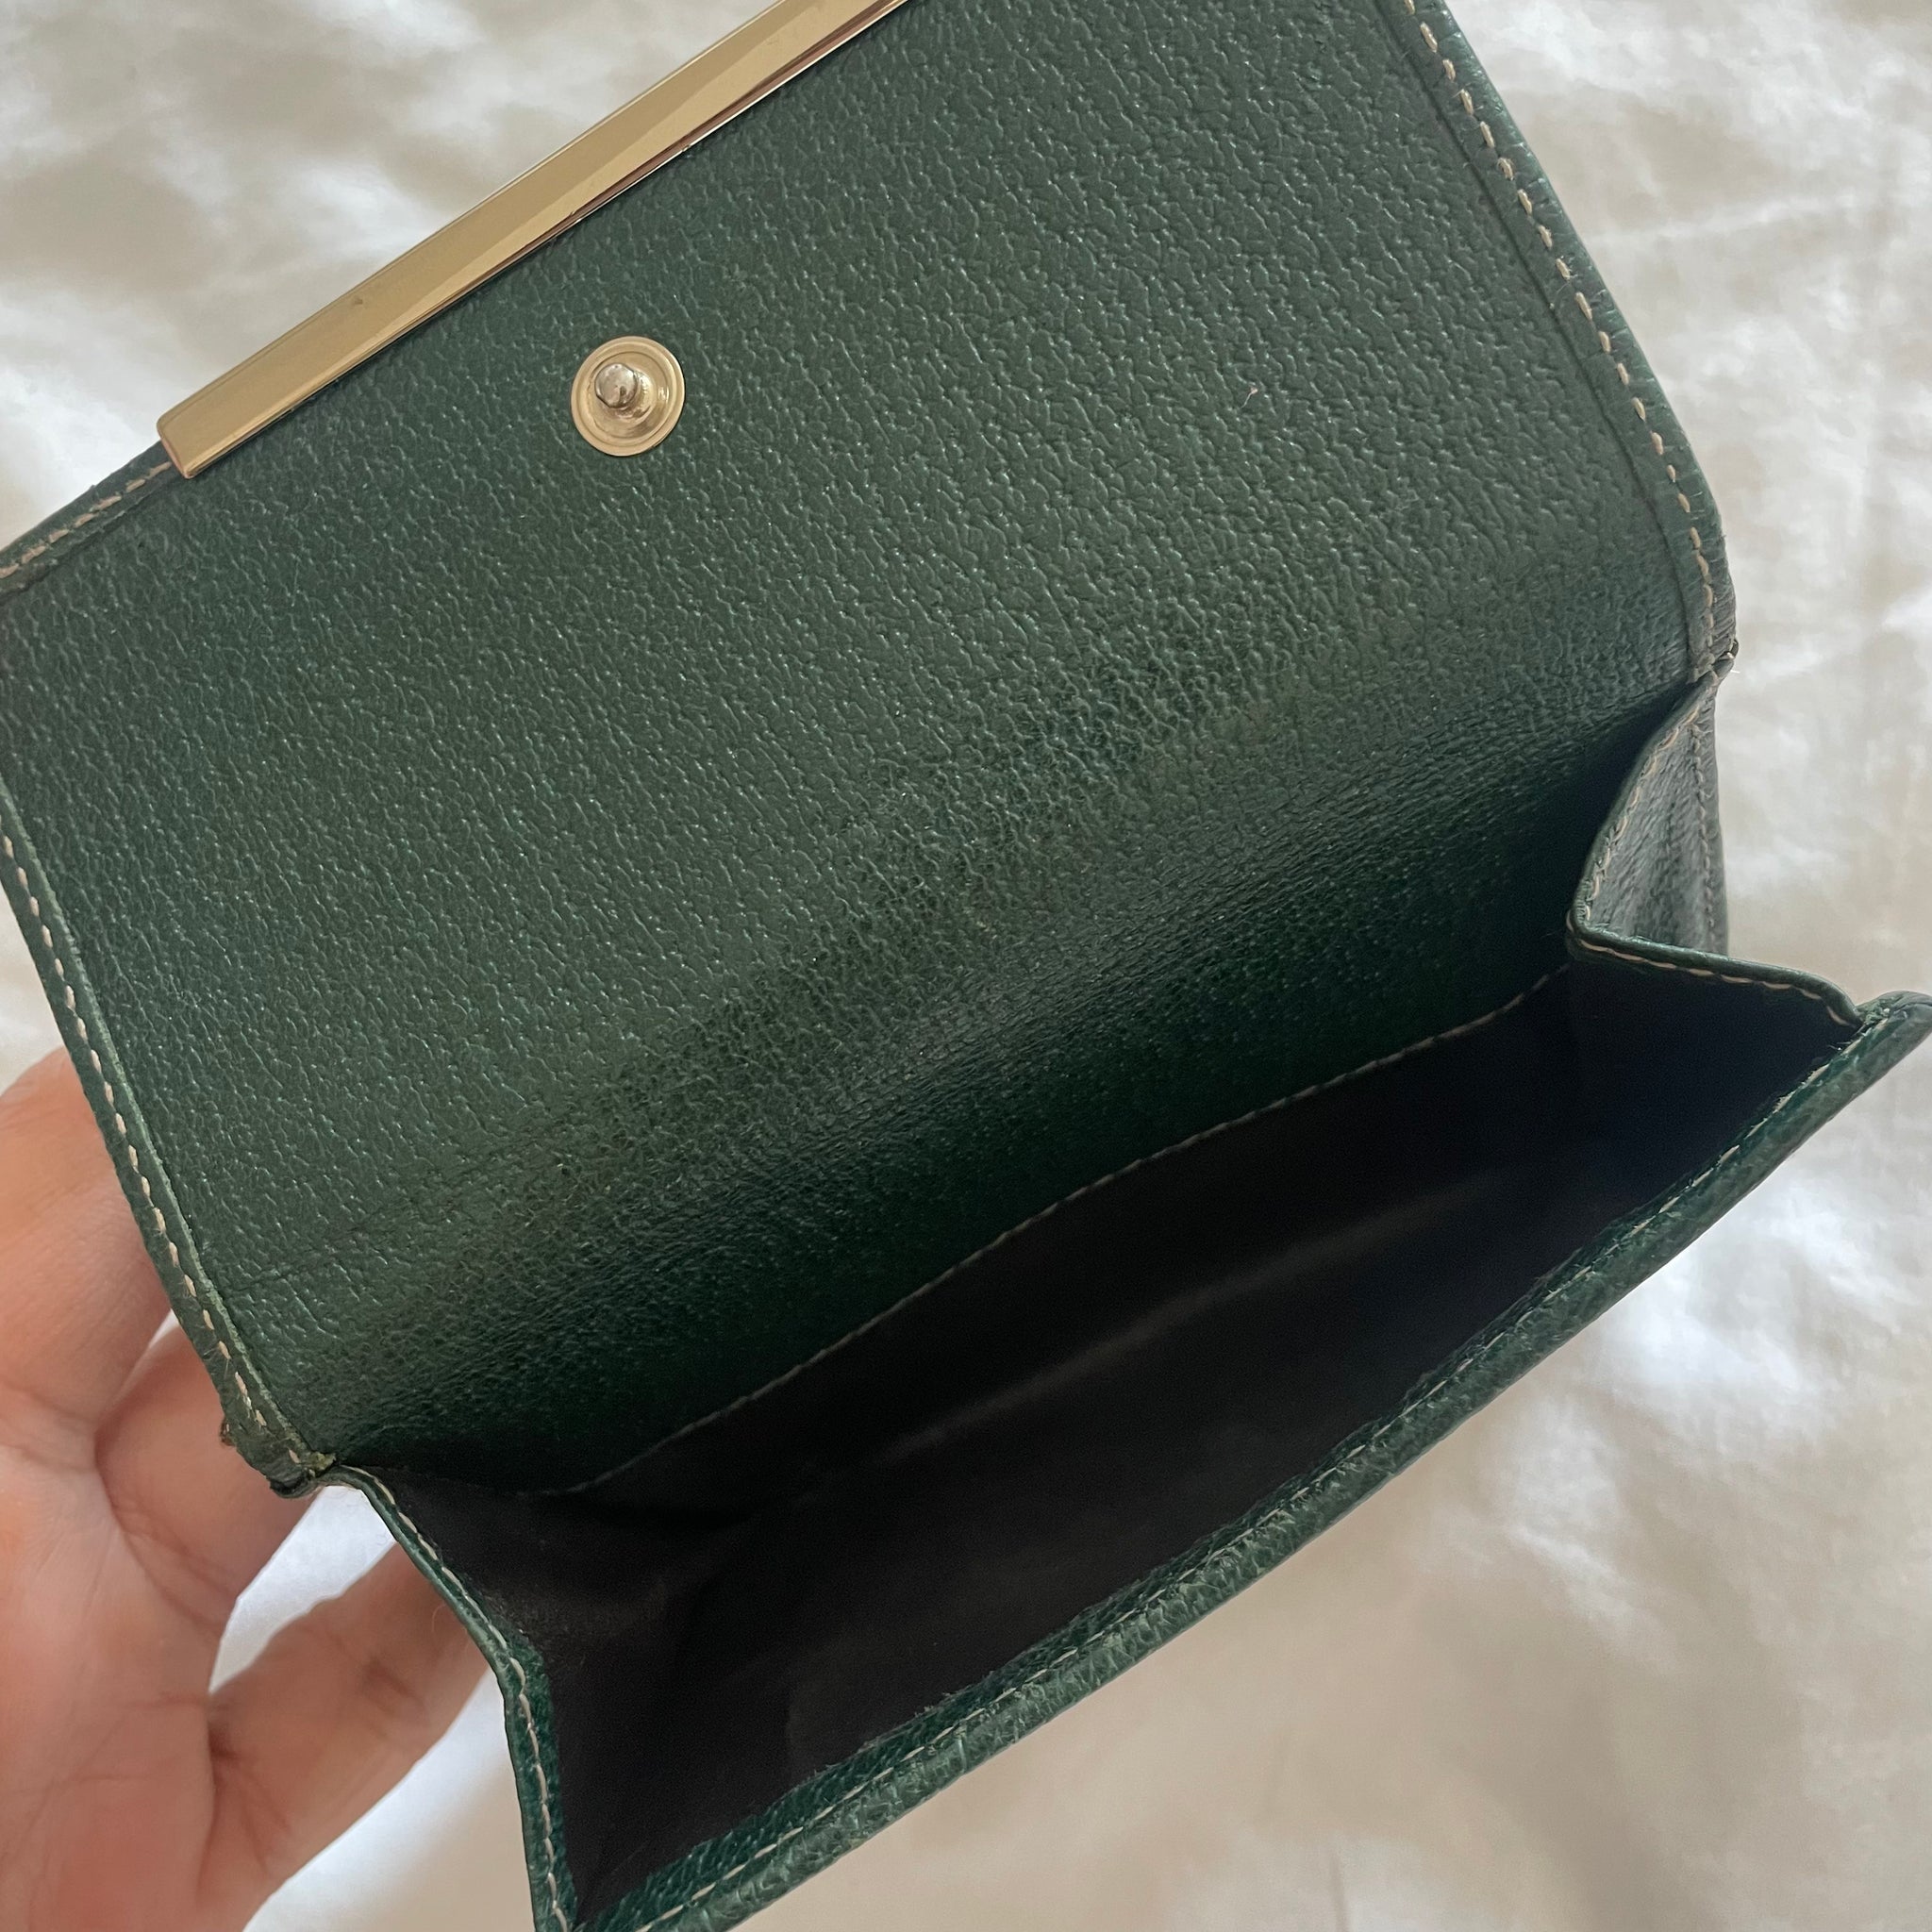 Gucci Compact Brown GG Print Canvas Green Leather Trim Wallet